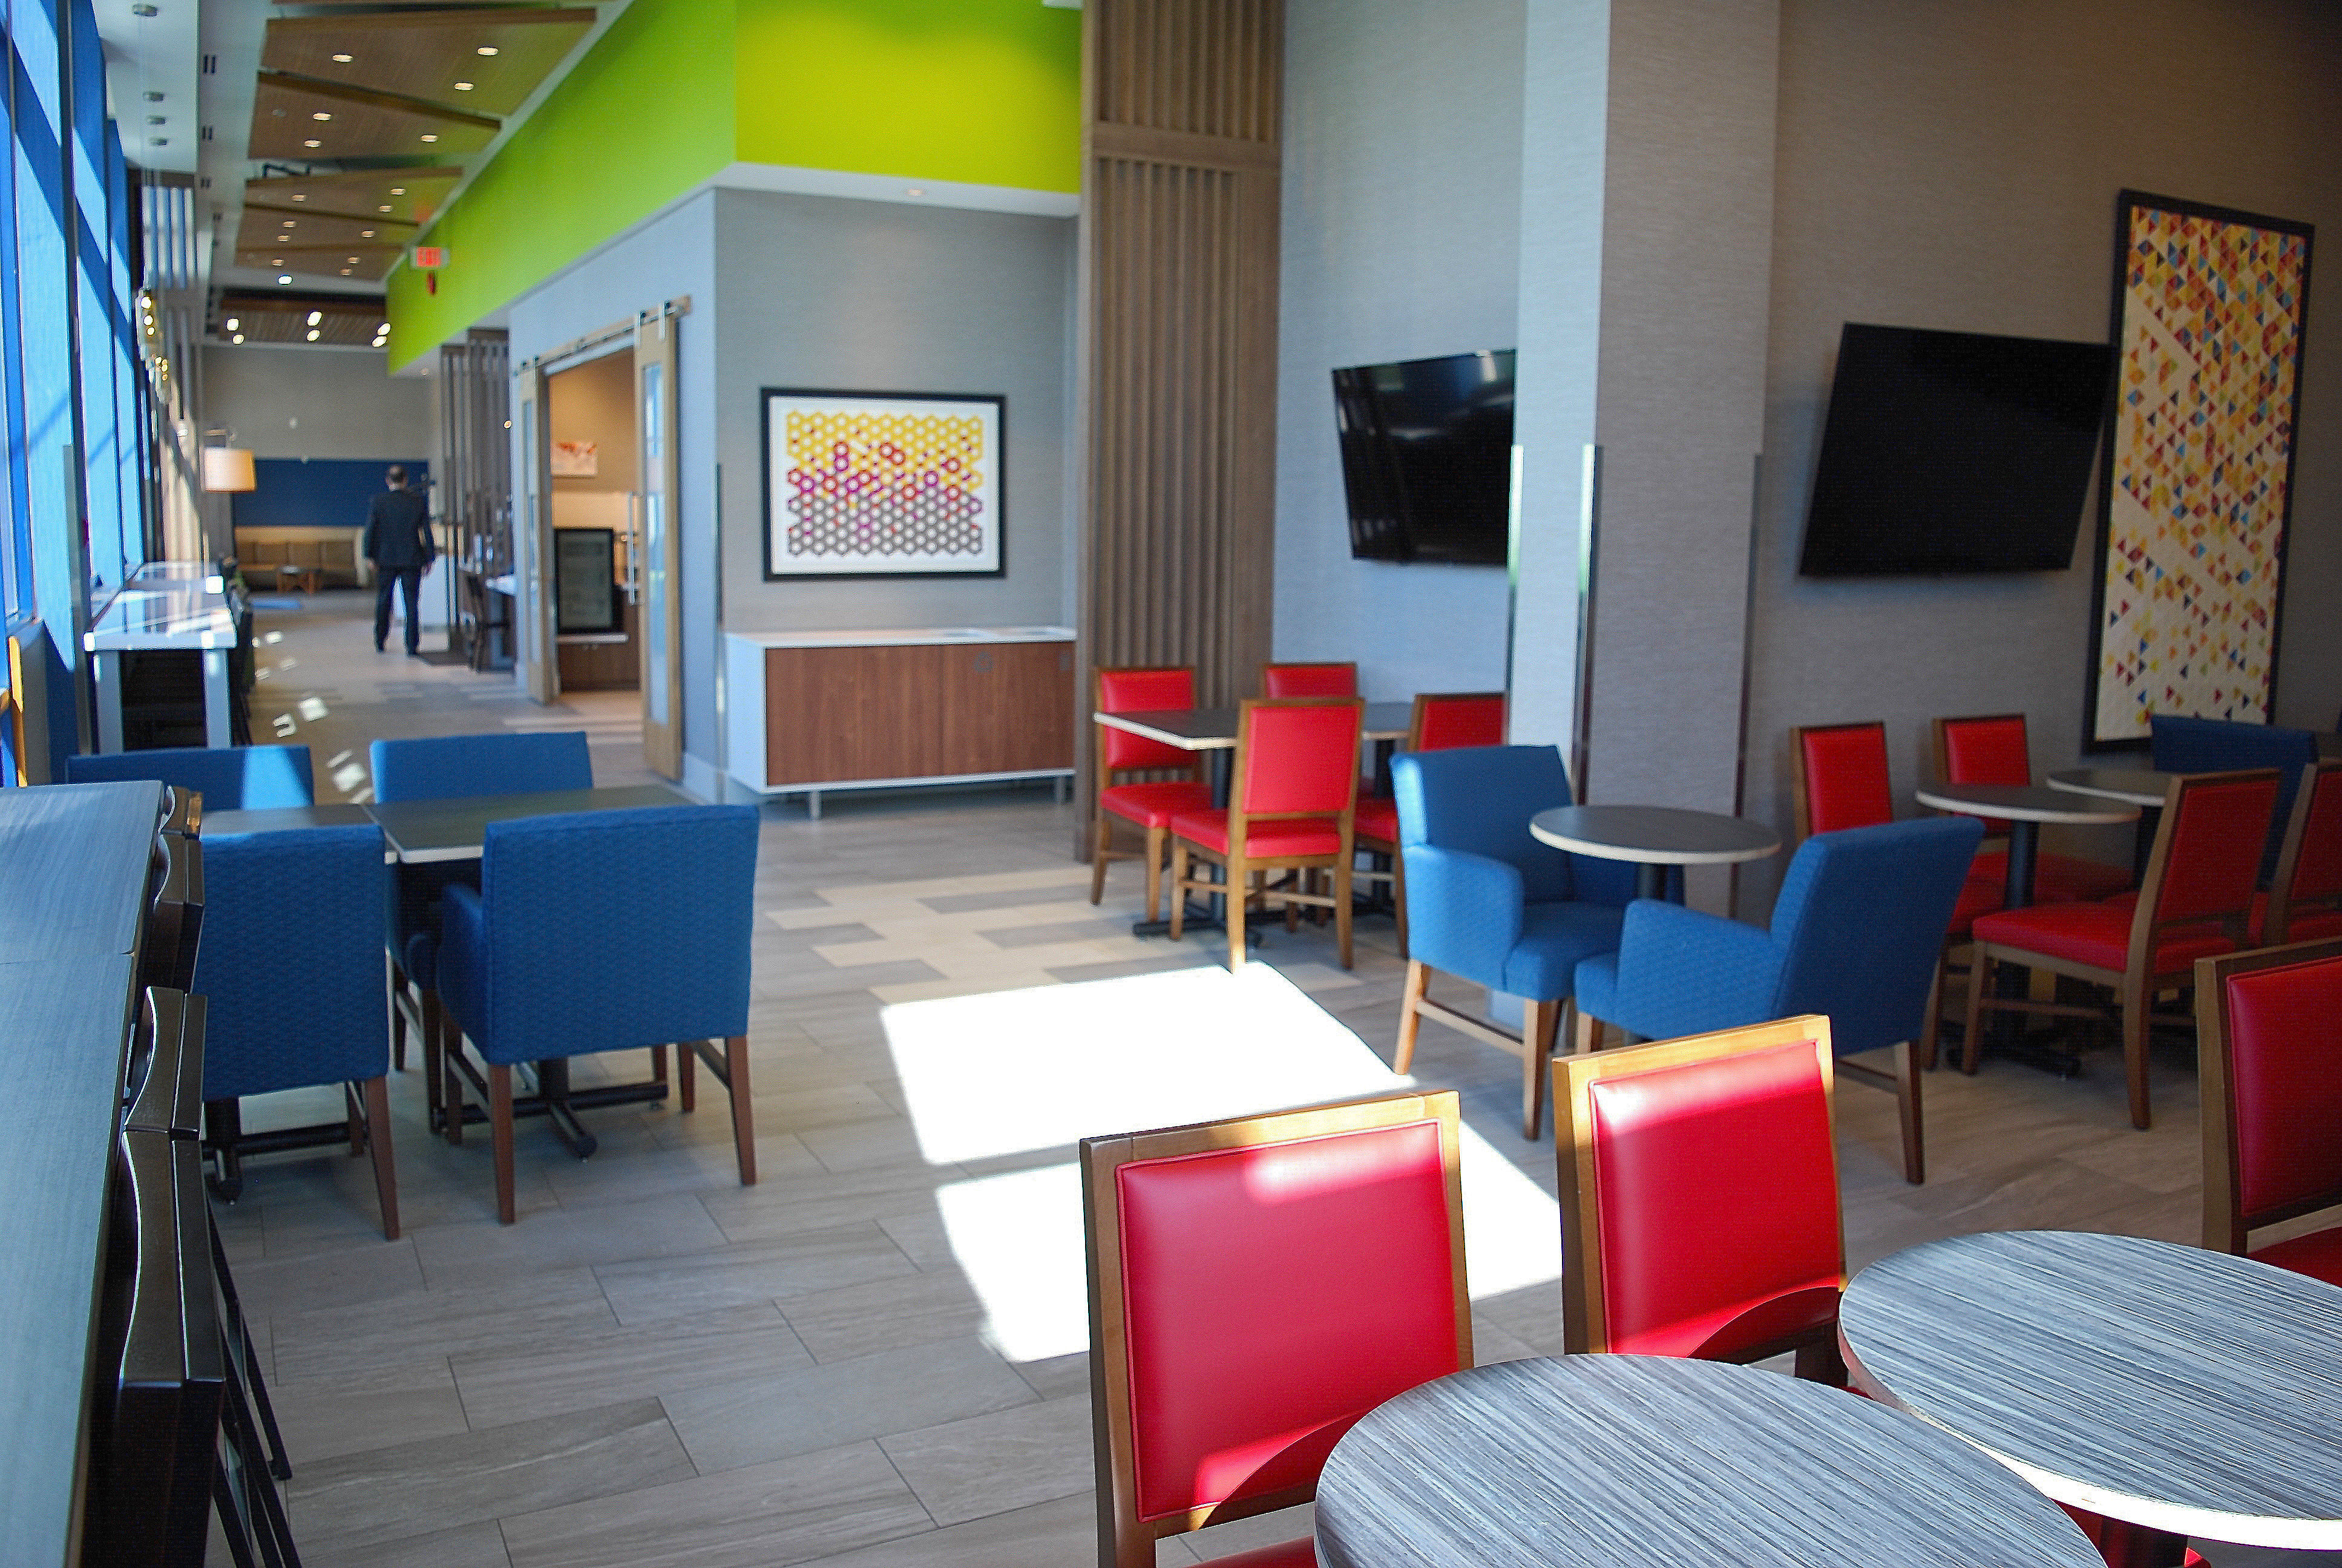 Our lobby waiting area offers seating for your convenience.